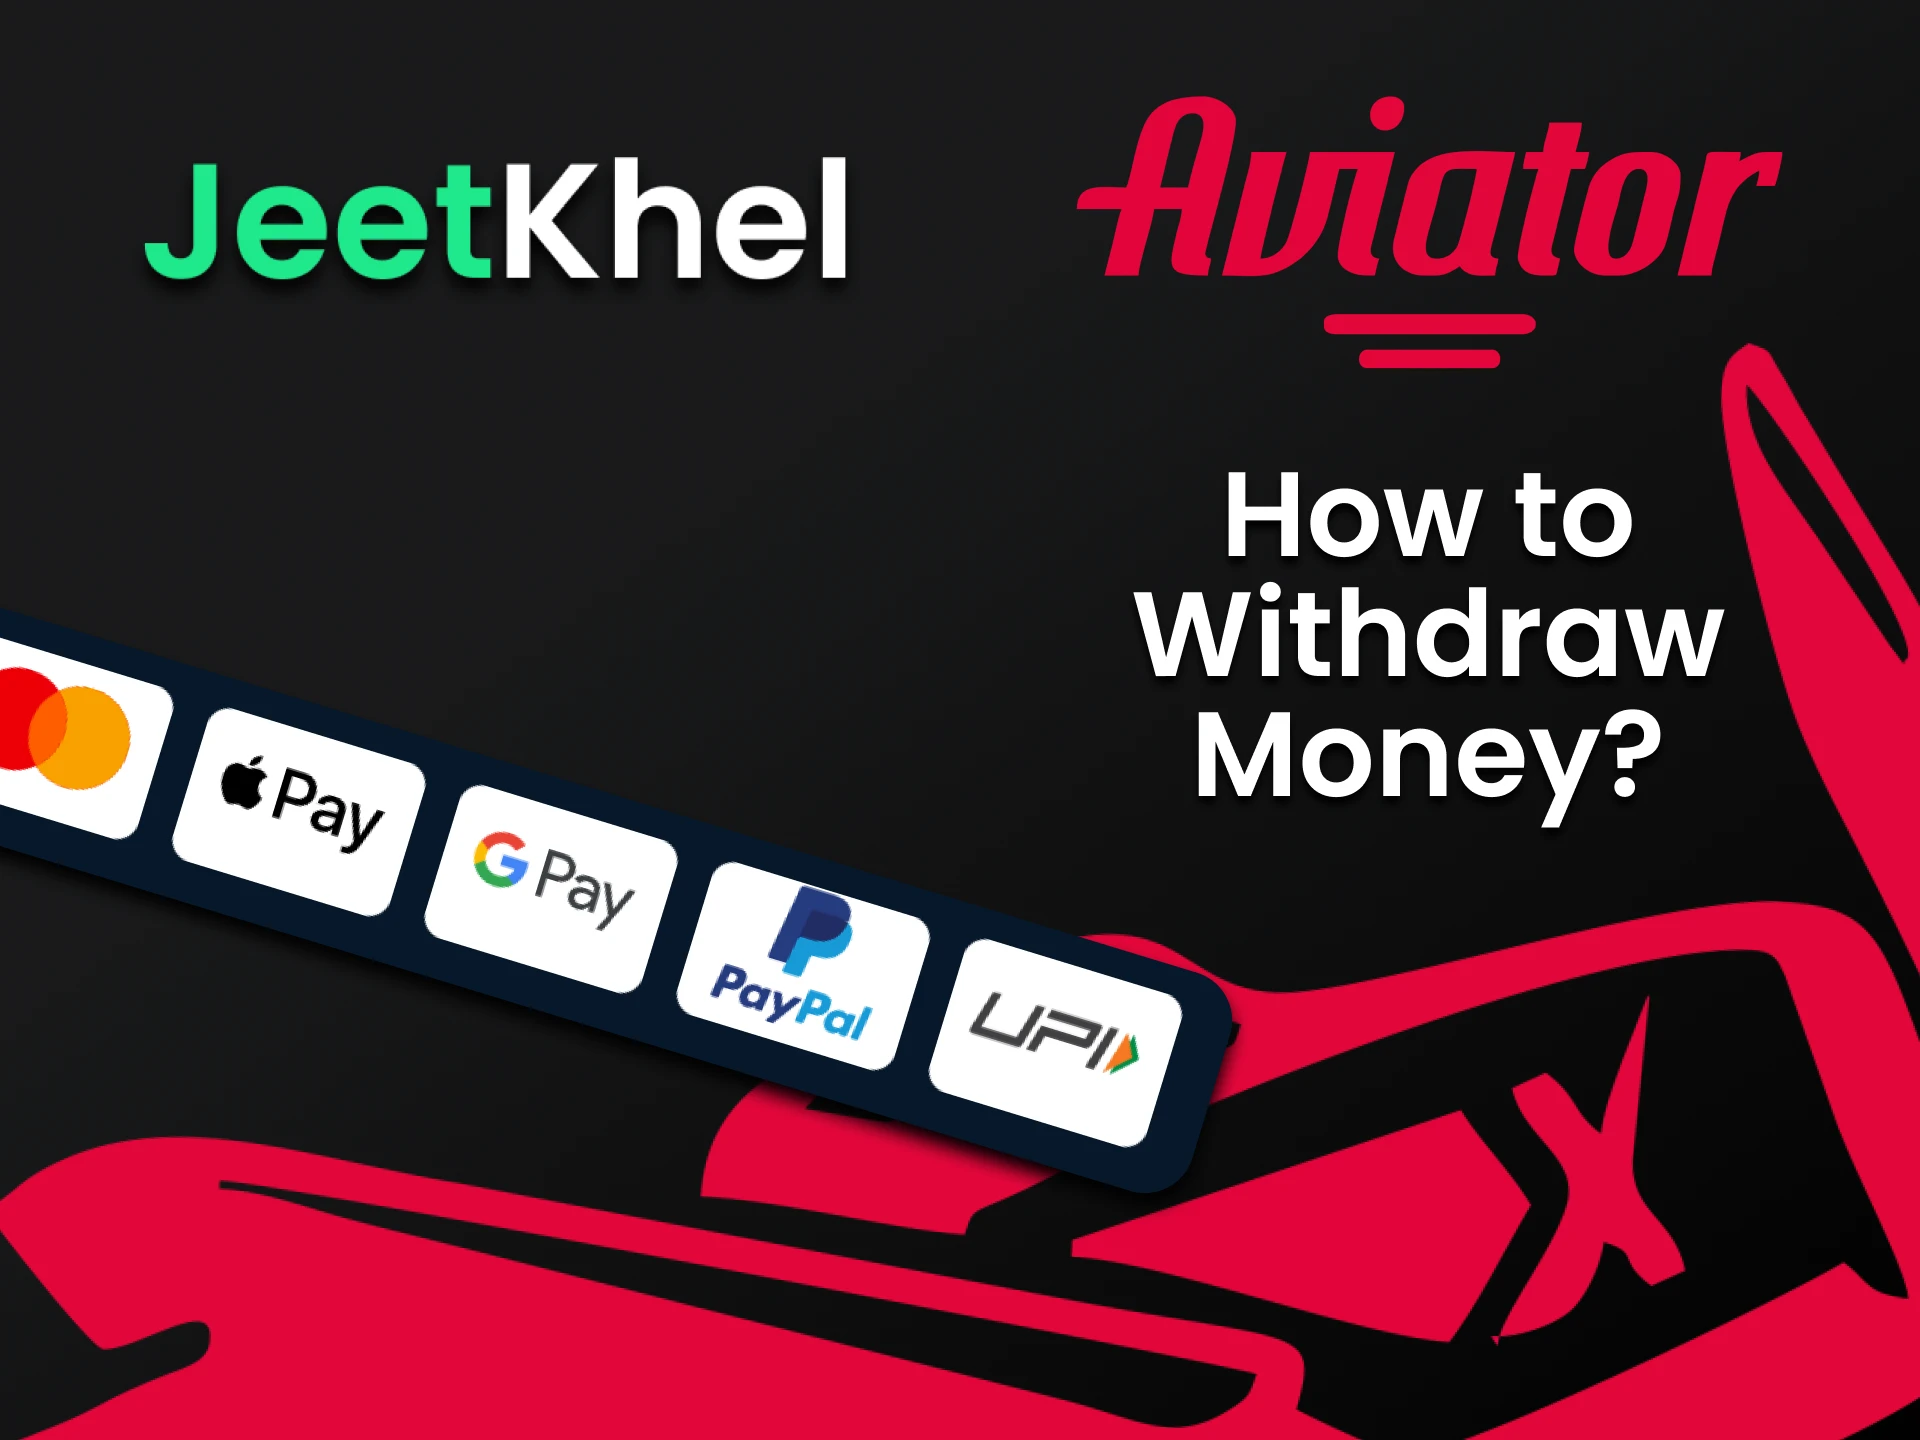 Find out about withdrawal options on JeetKhel website.